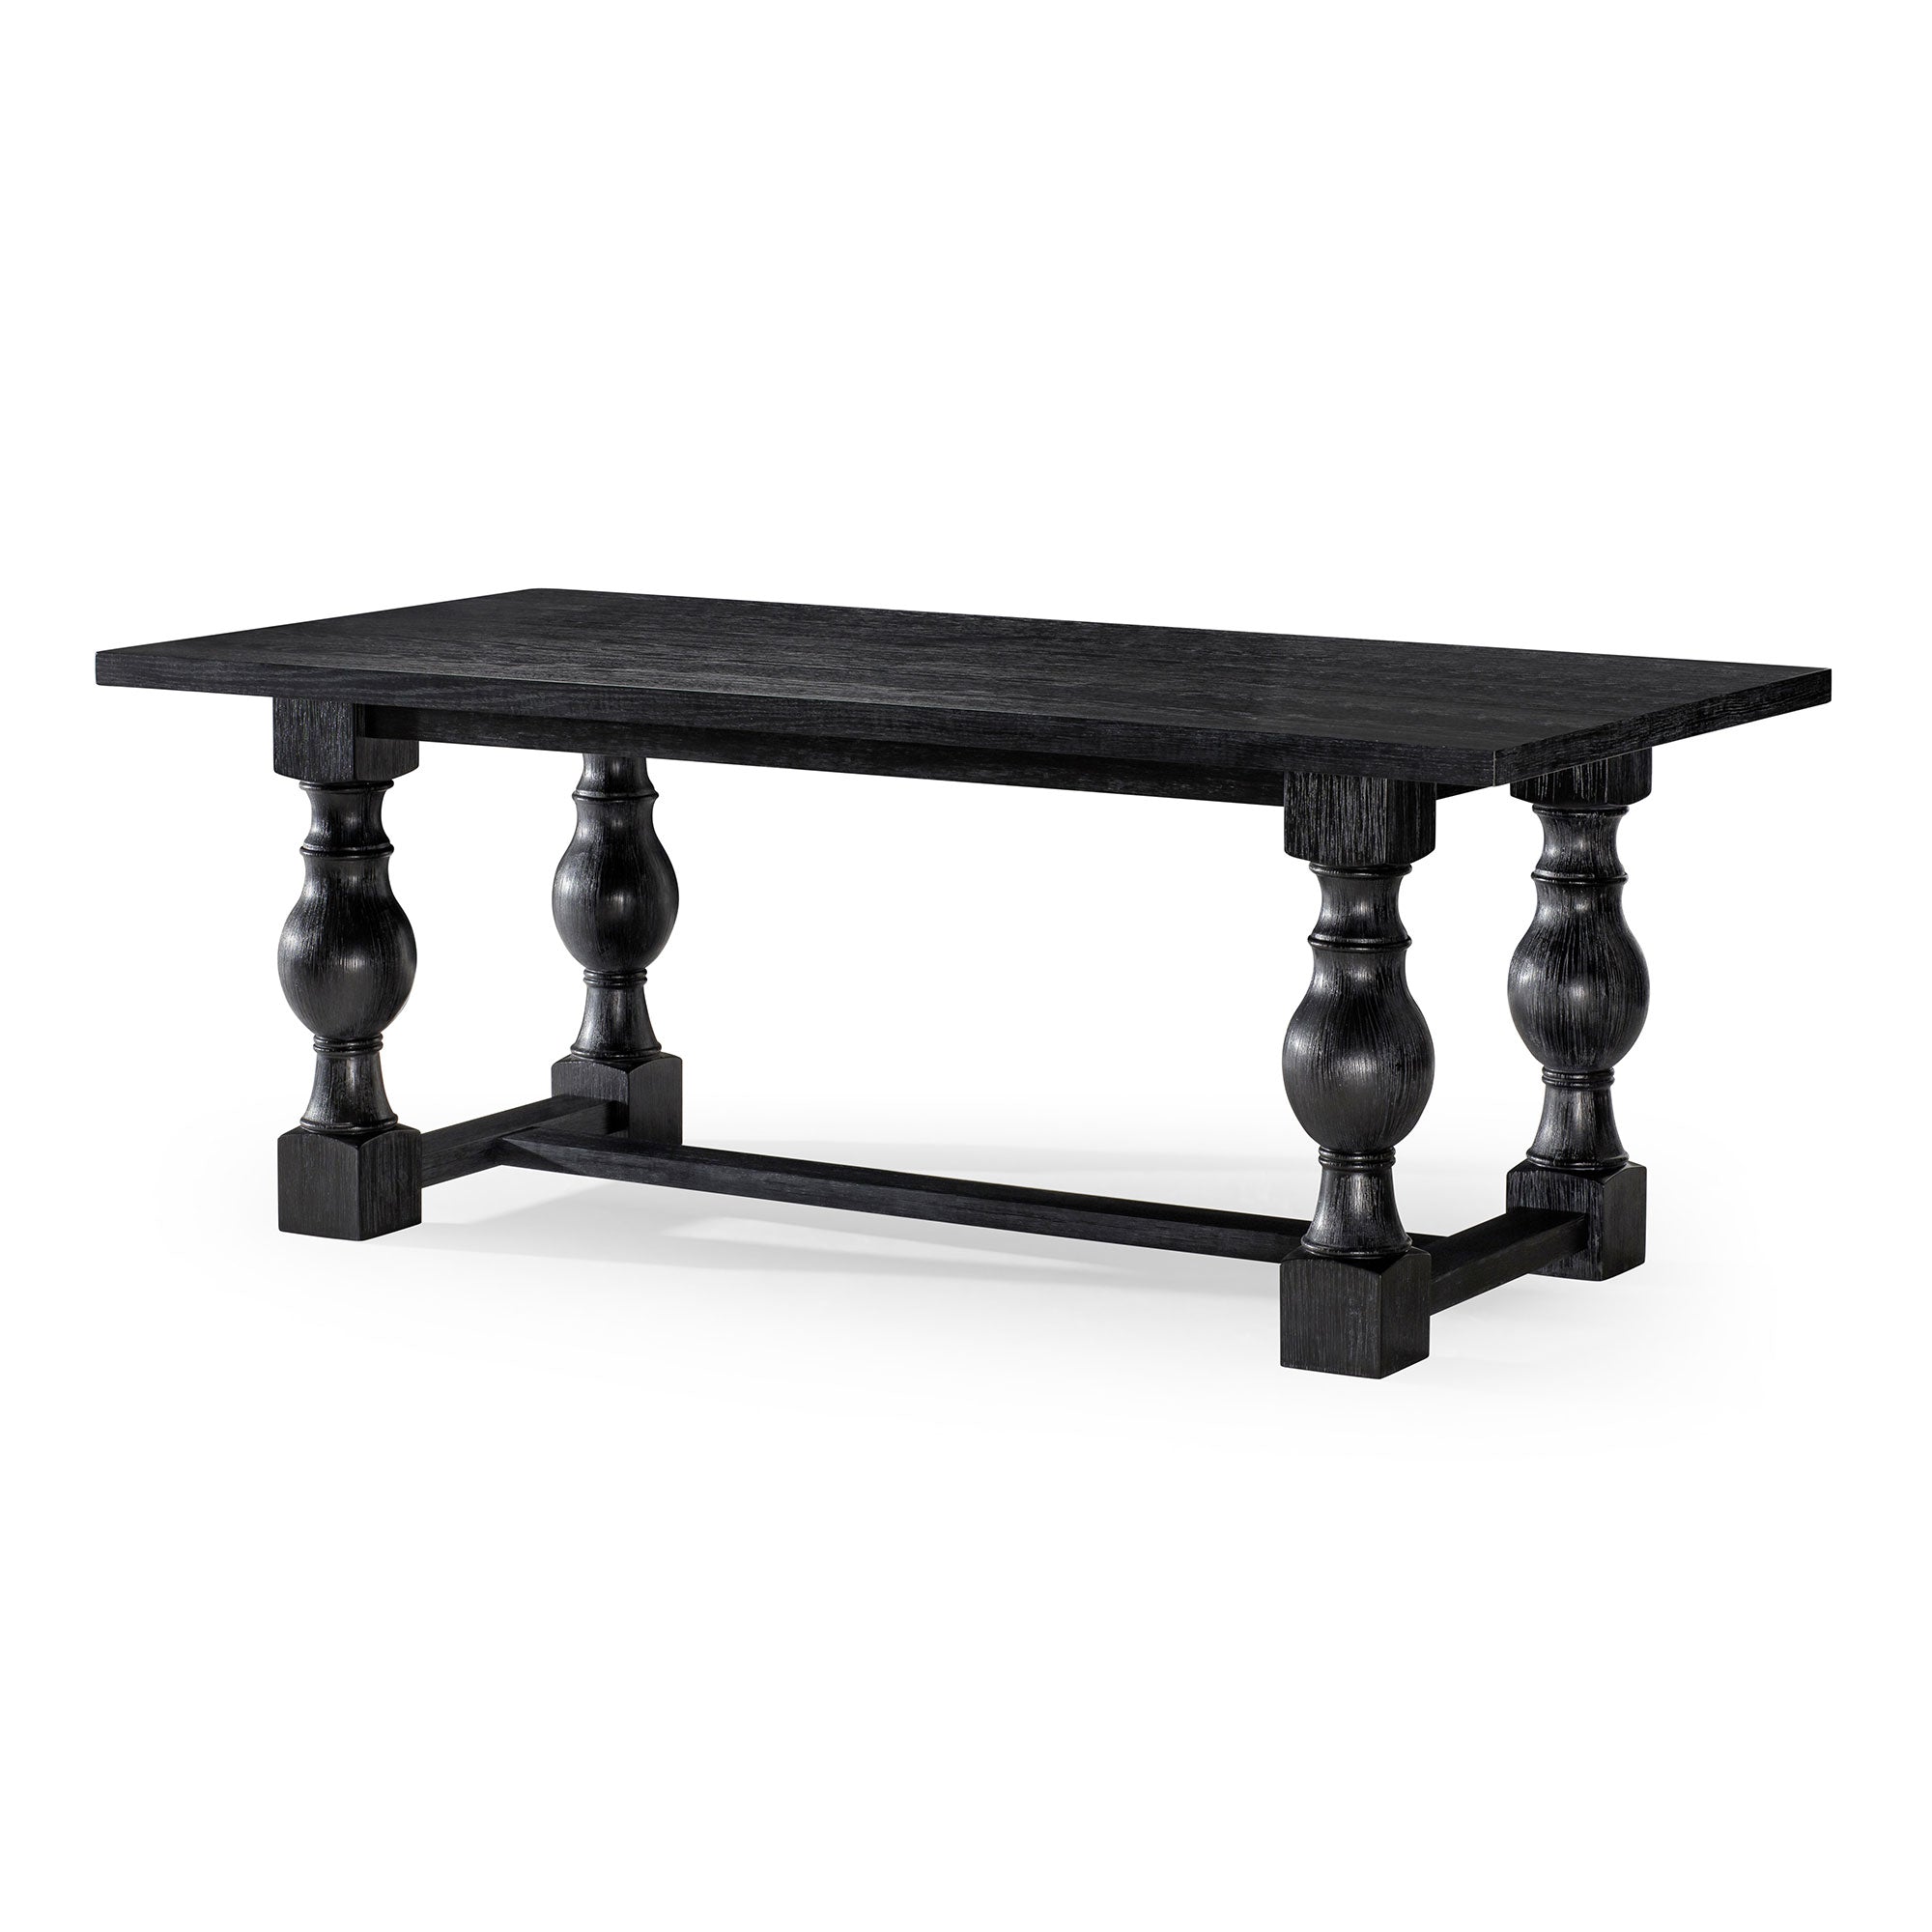 Leon Classical Wooden Dining Table in Antiqued Black Finish in Dining Furniture by Maven Lane